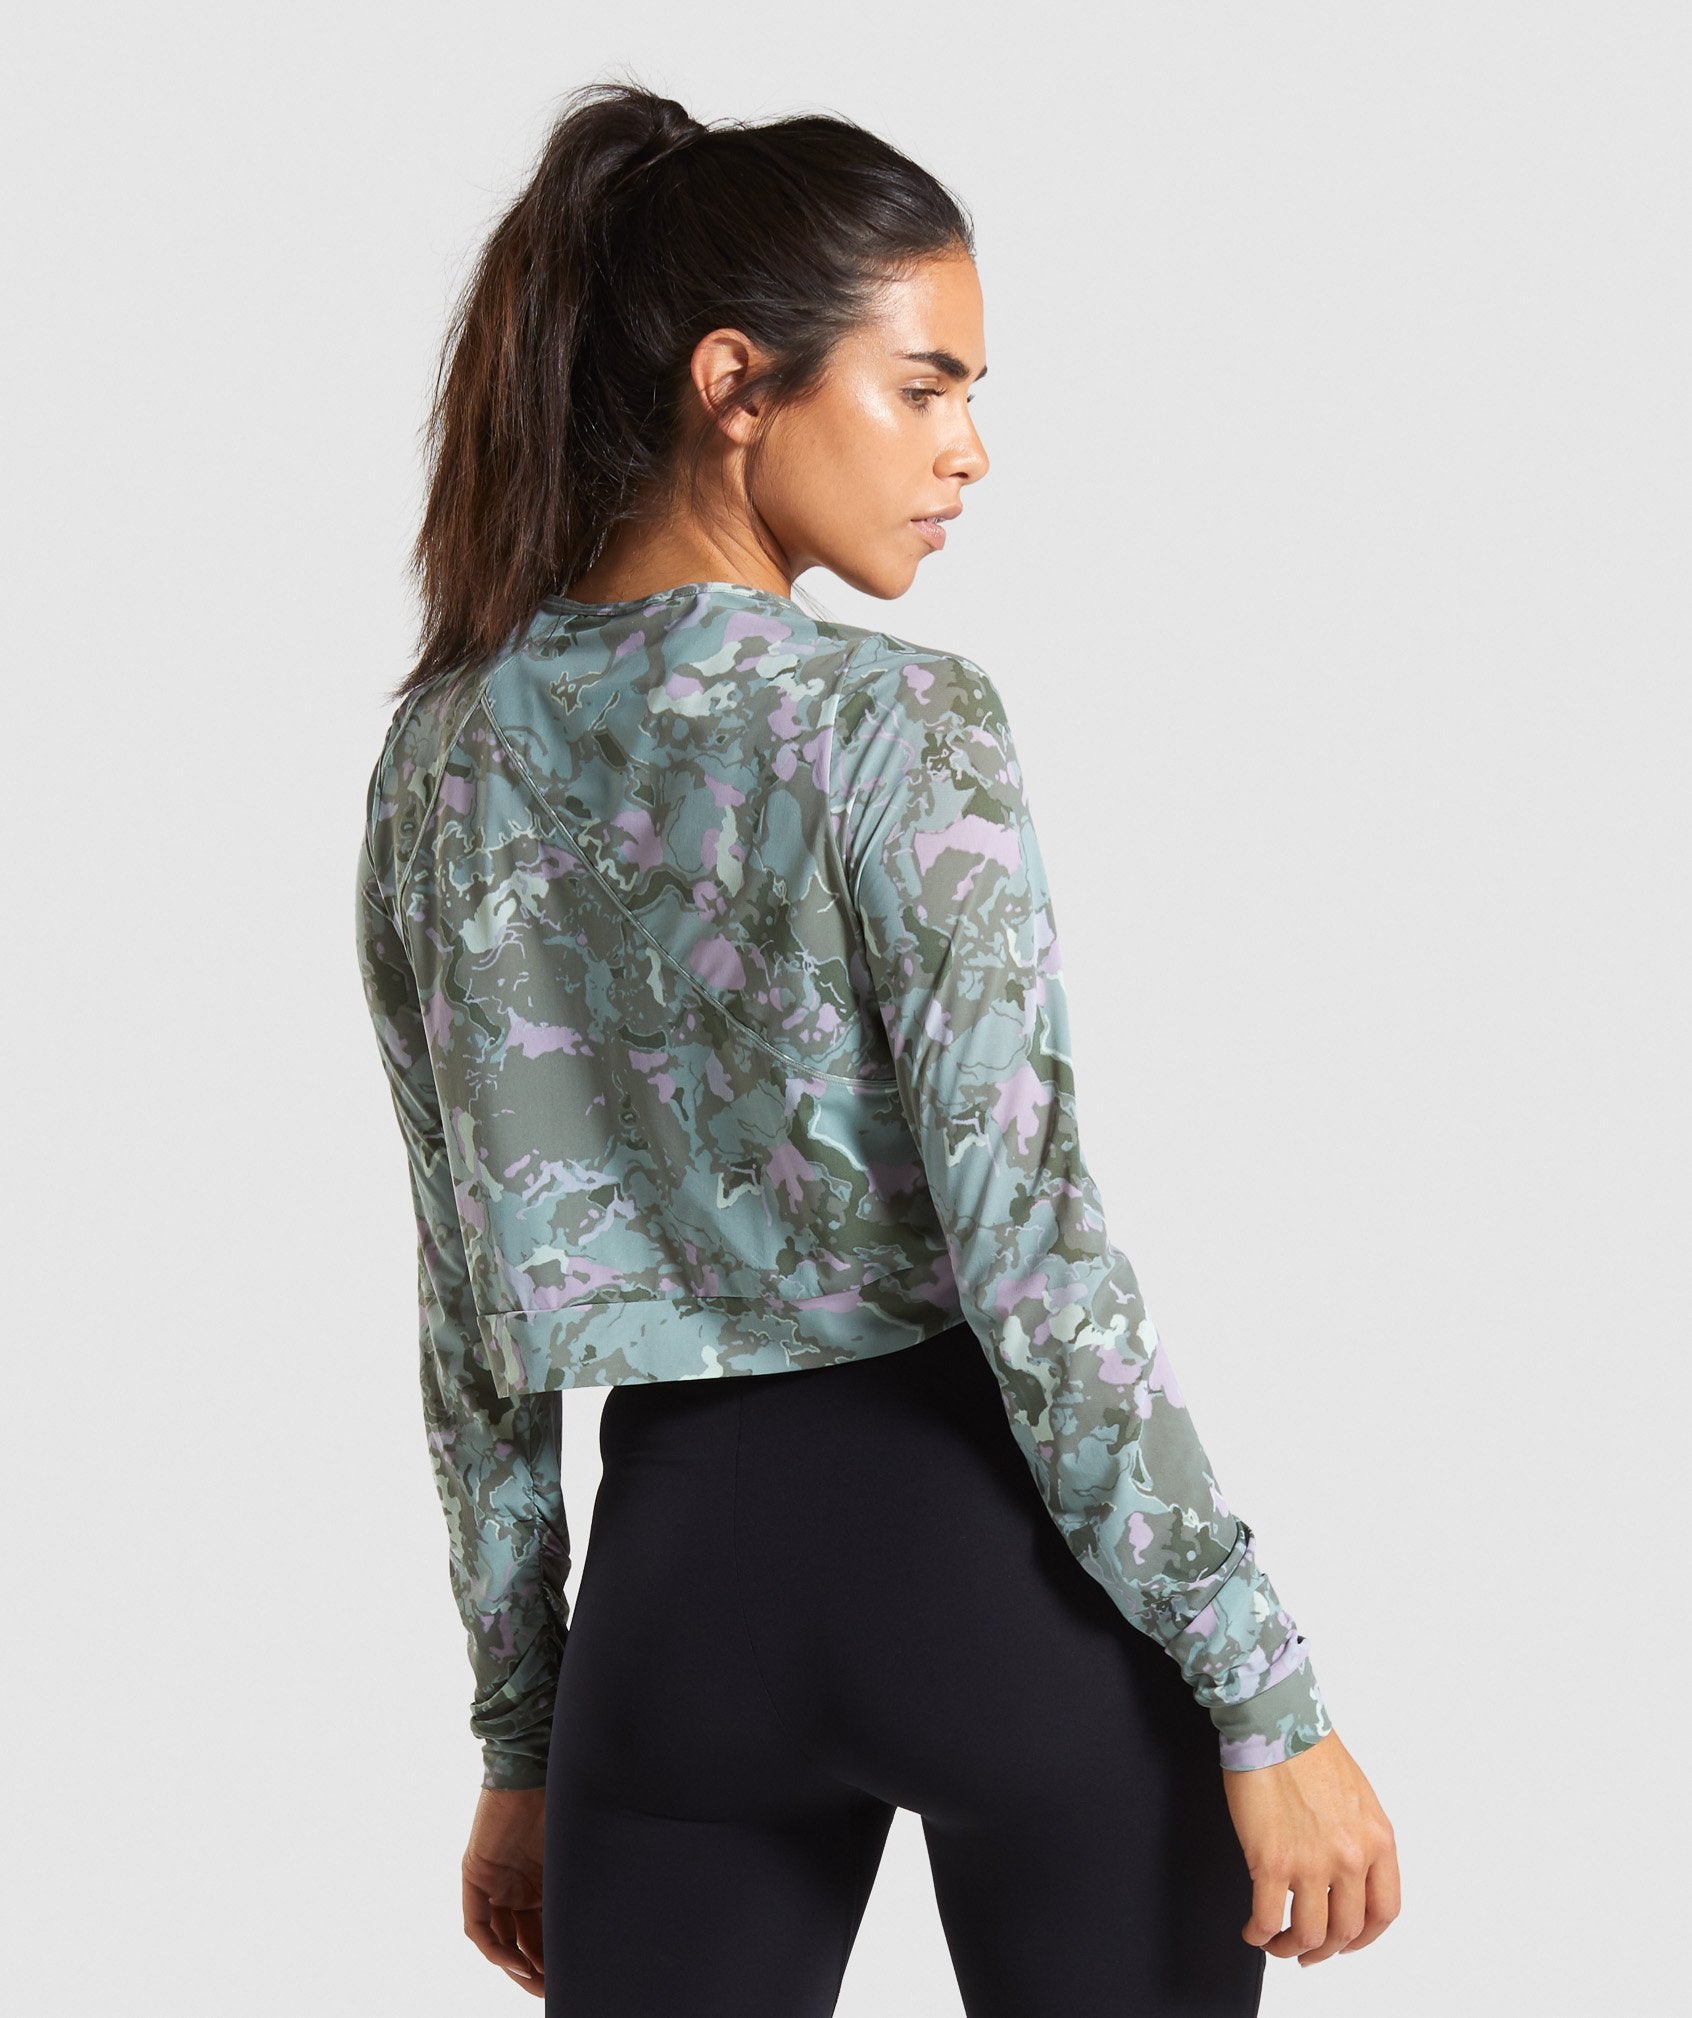 Mesh Layer Long Sleeve Top in Light Green - view 2